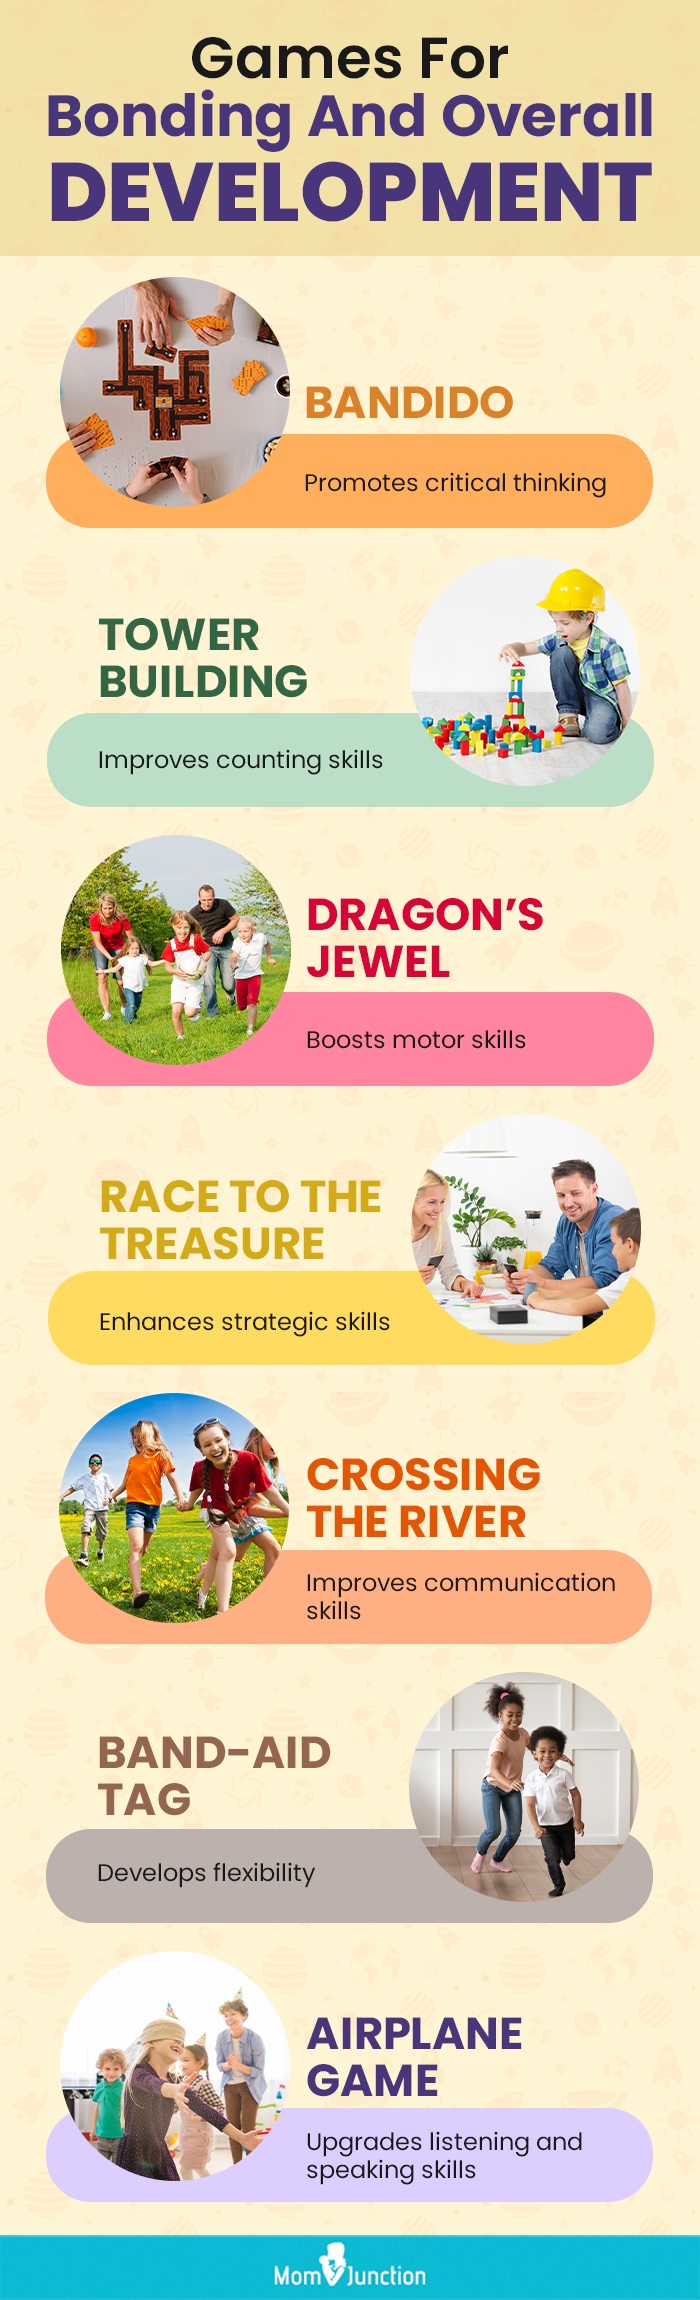 games for bonding and overall development (infographic)